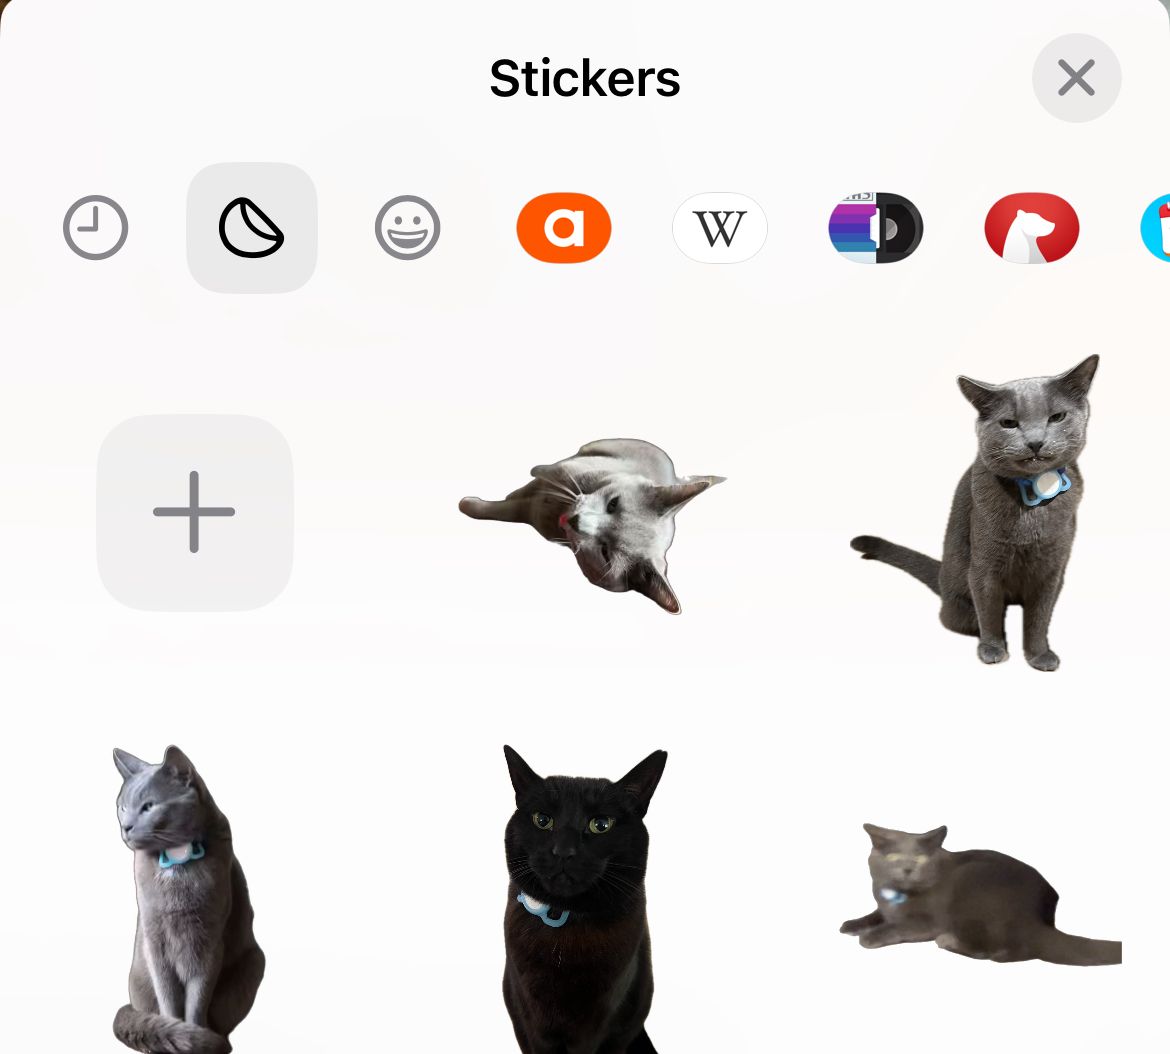 iPhone stickers for use in iMessage.